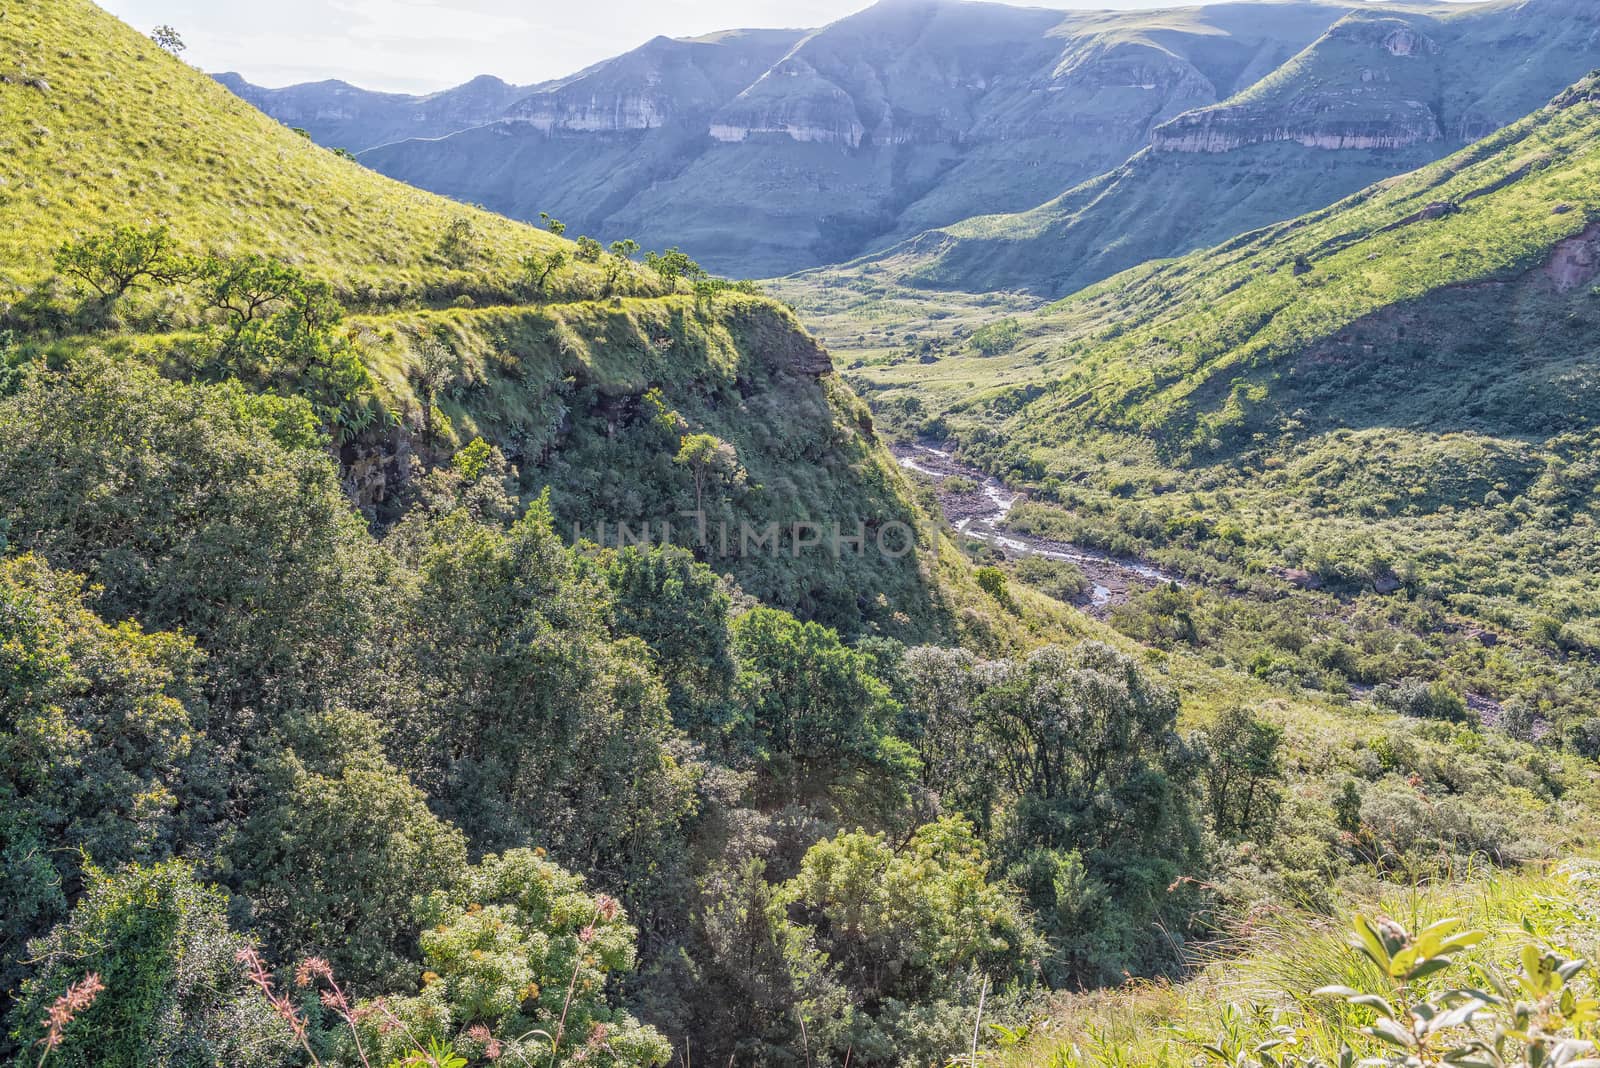 View from the Tugela Gorge hiking trail towards the North. The Tugela River and the hiking trail are visible